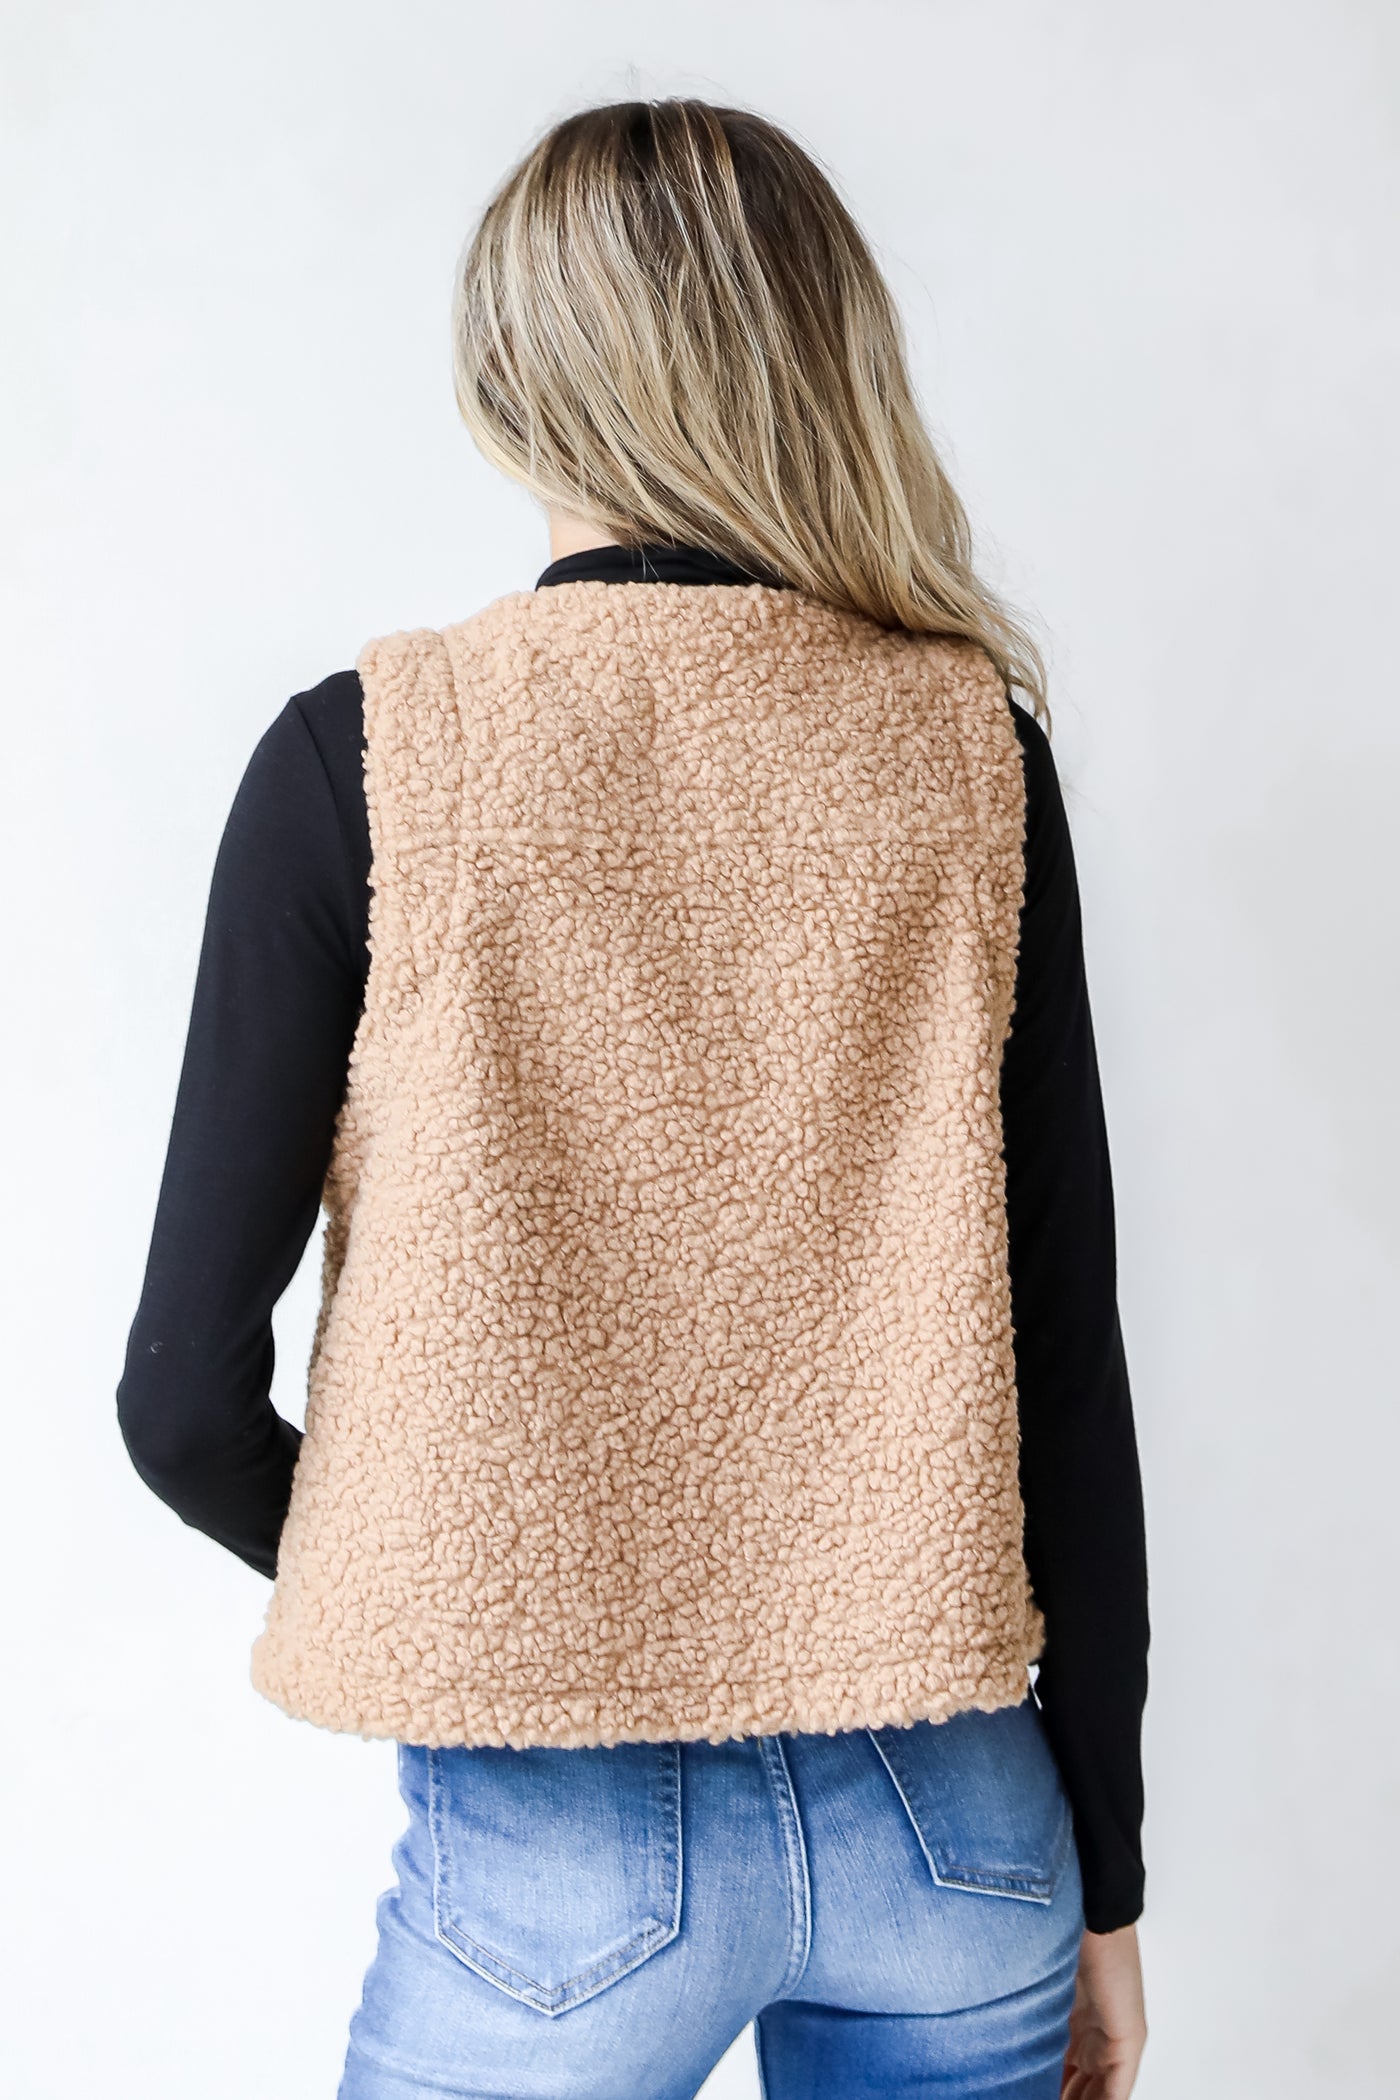 Sherpa Vest in taupe back view